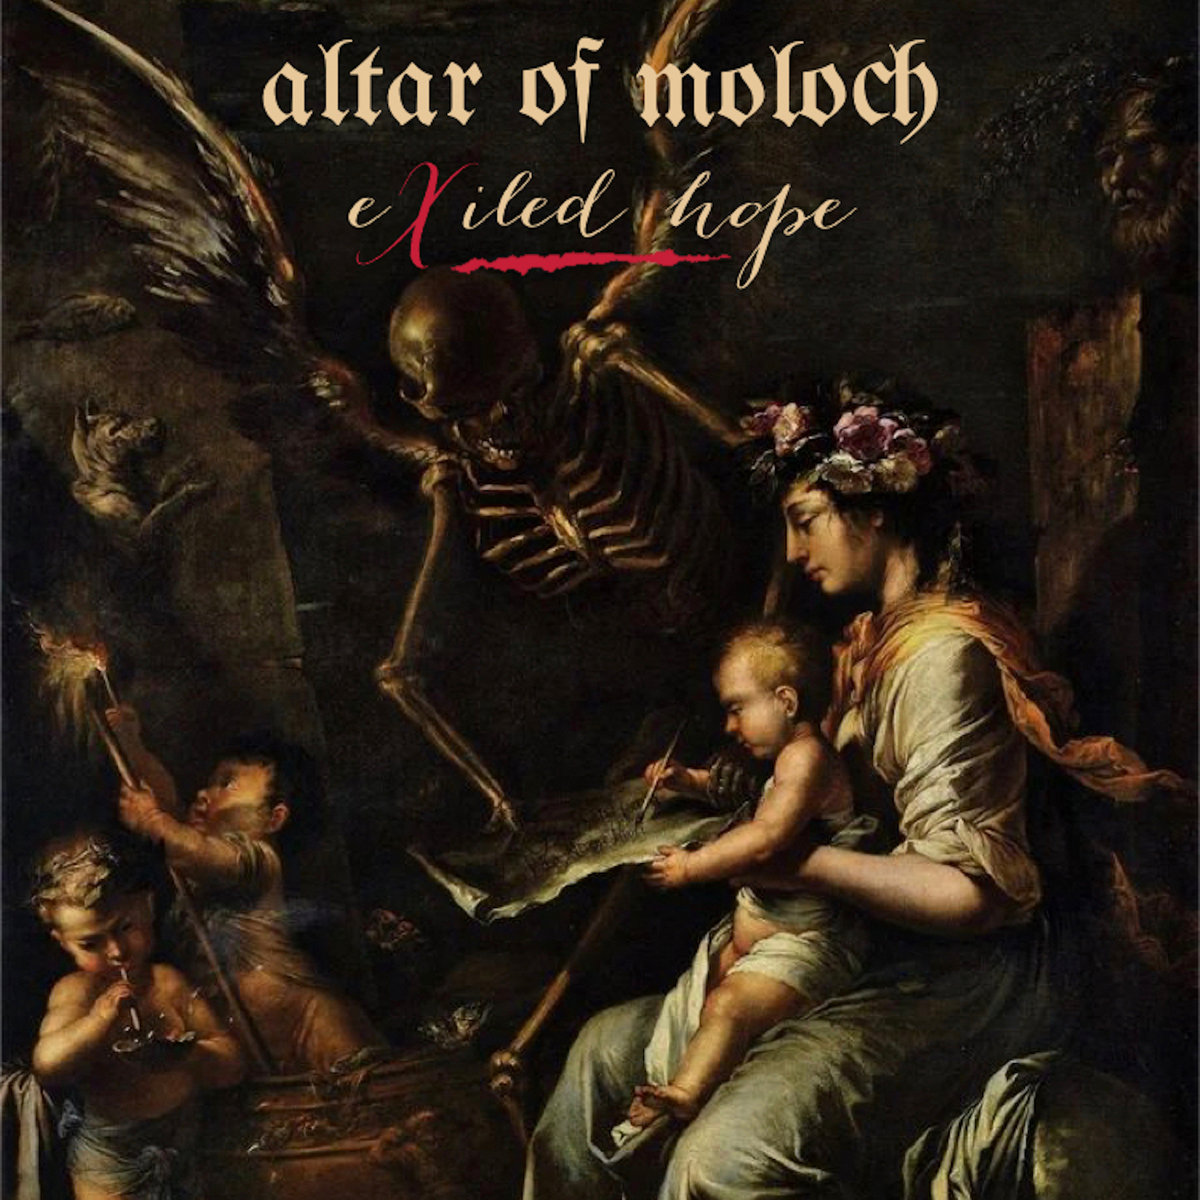 LISTEN: “Altar of Moloch” by Exiled Hope